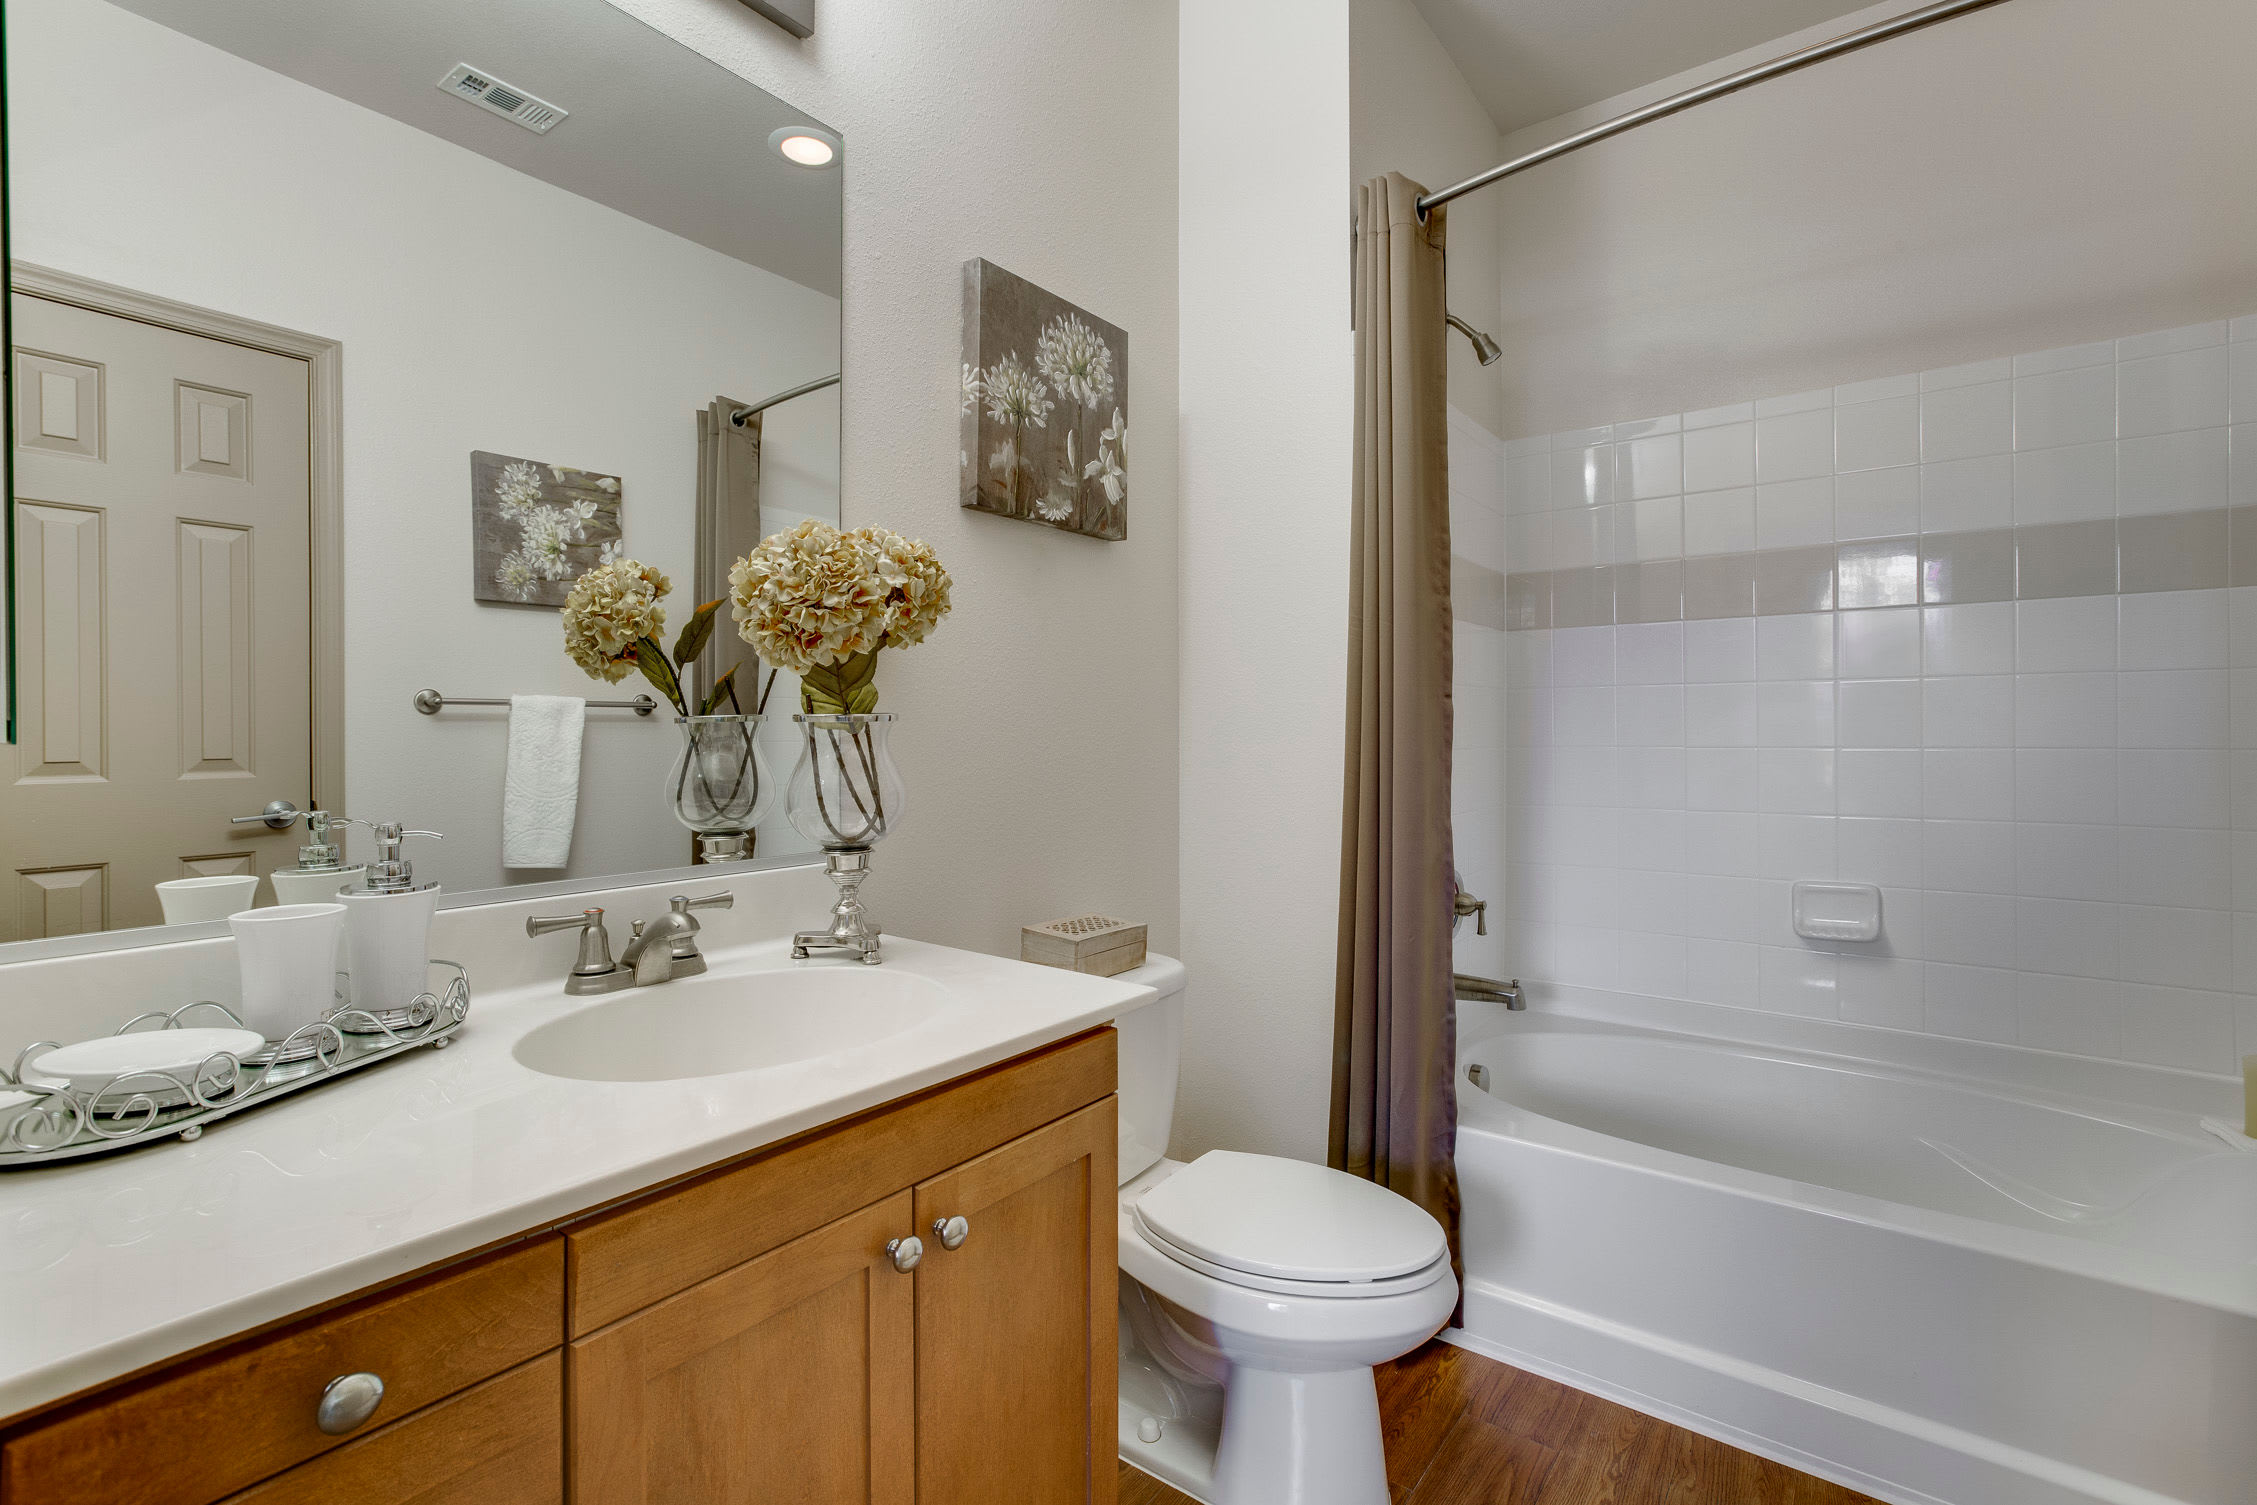 Bathroom with wood cabinets at Summerfield at Morgan Metro in Hyattsville, Maryland